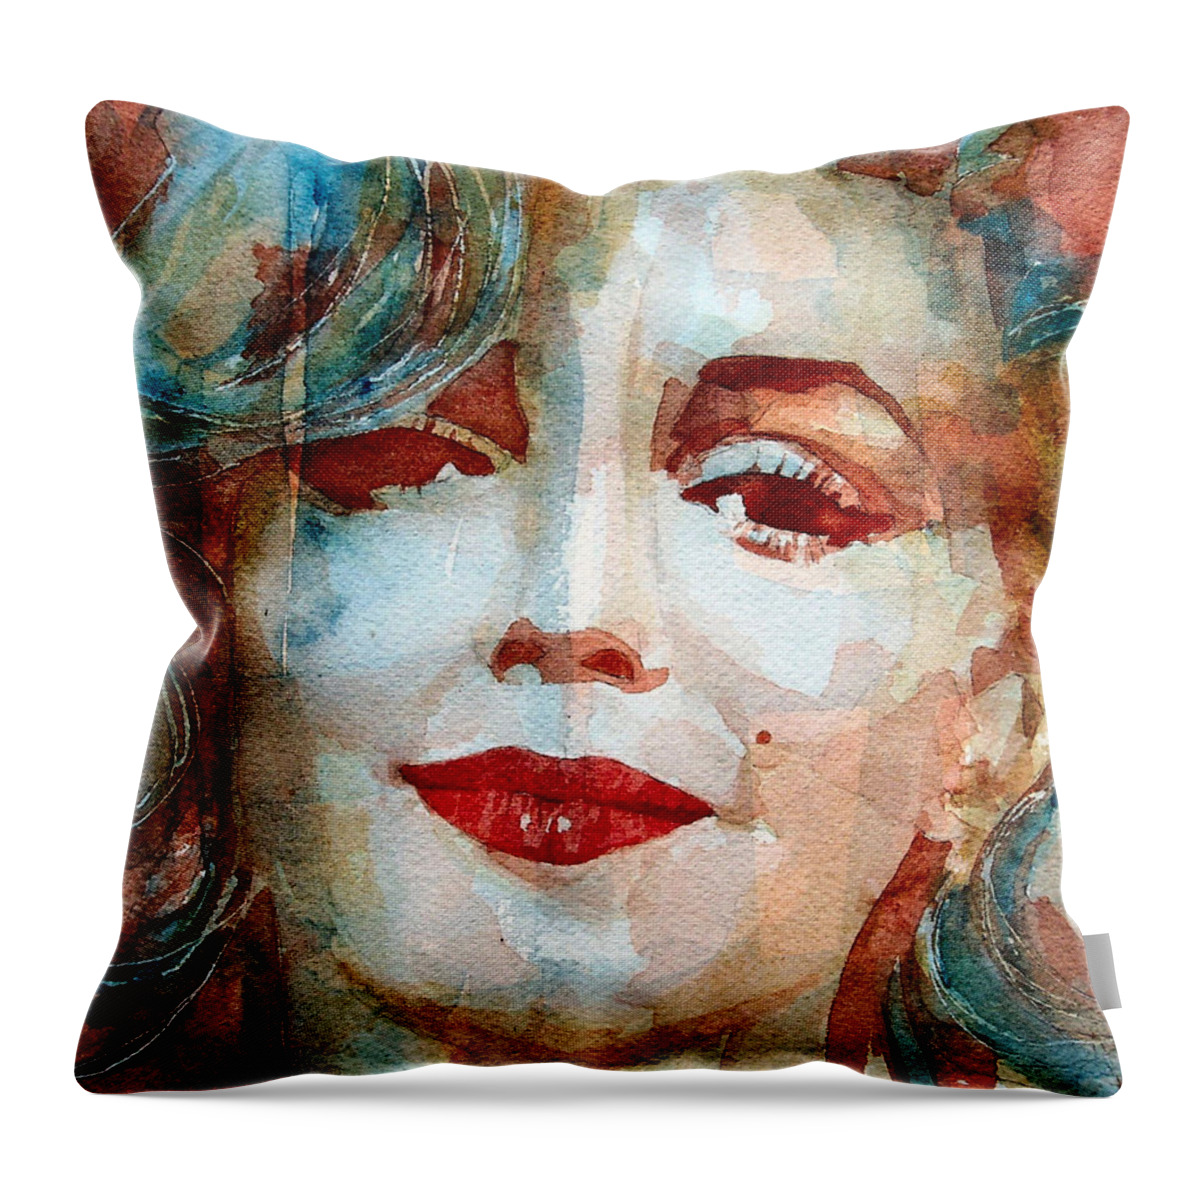 Marilyn Monroe Throw Pillow featuring the painting Marilyn  by Paul Lovering